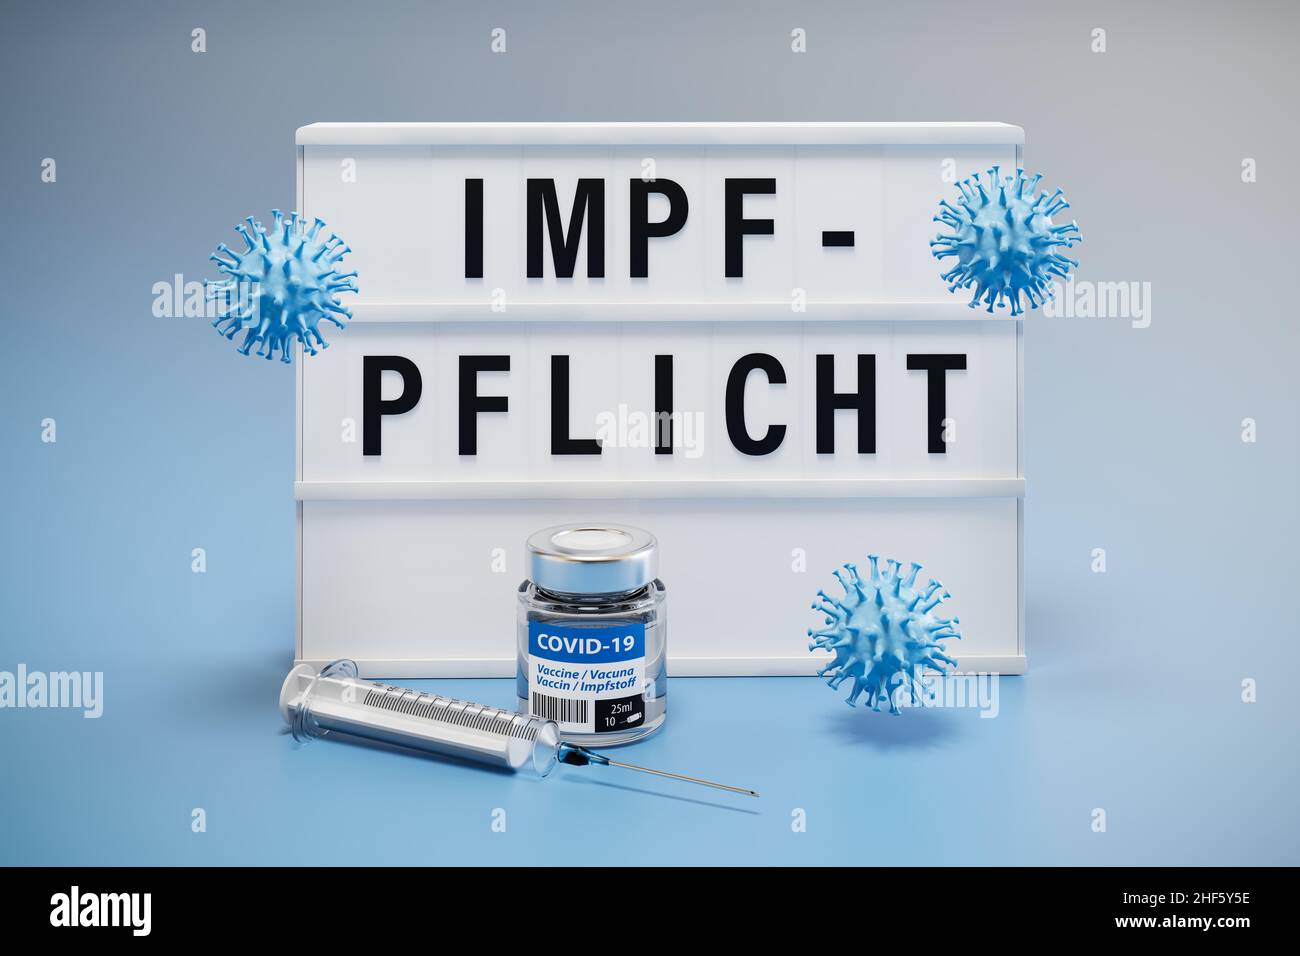 The German word 'Impfpflicht' (vaccine mandate) displayed on a lightbox. Syringe, virus models and a bottle of vaccine around. Stock Photo